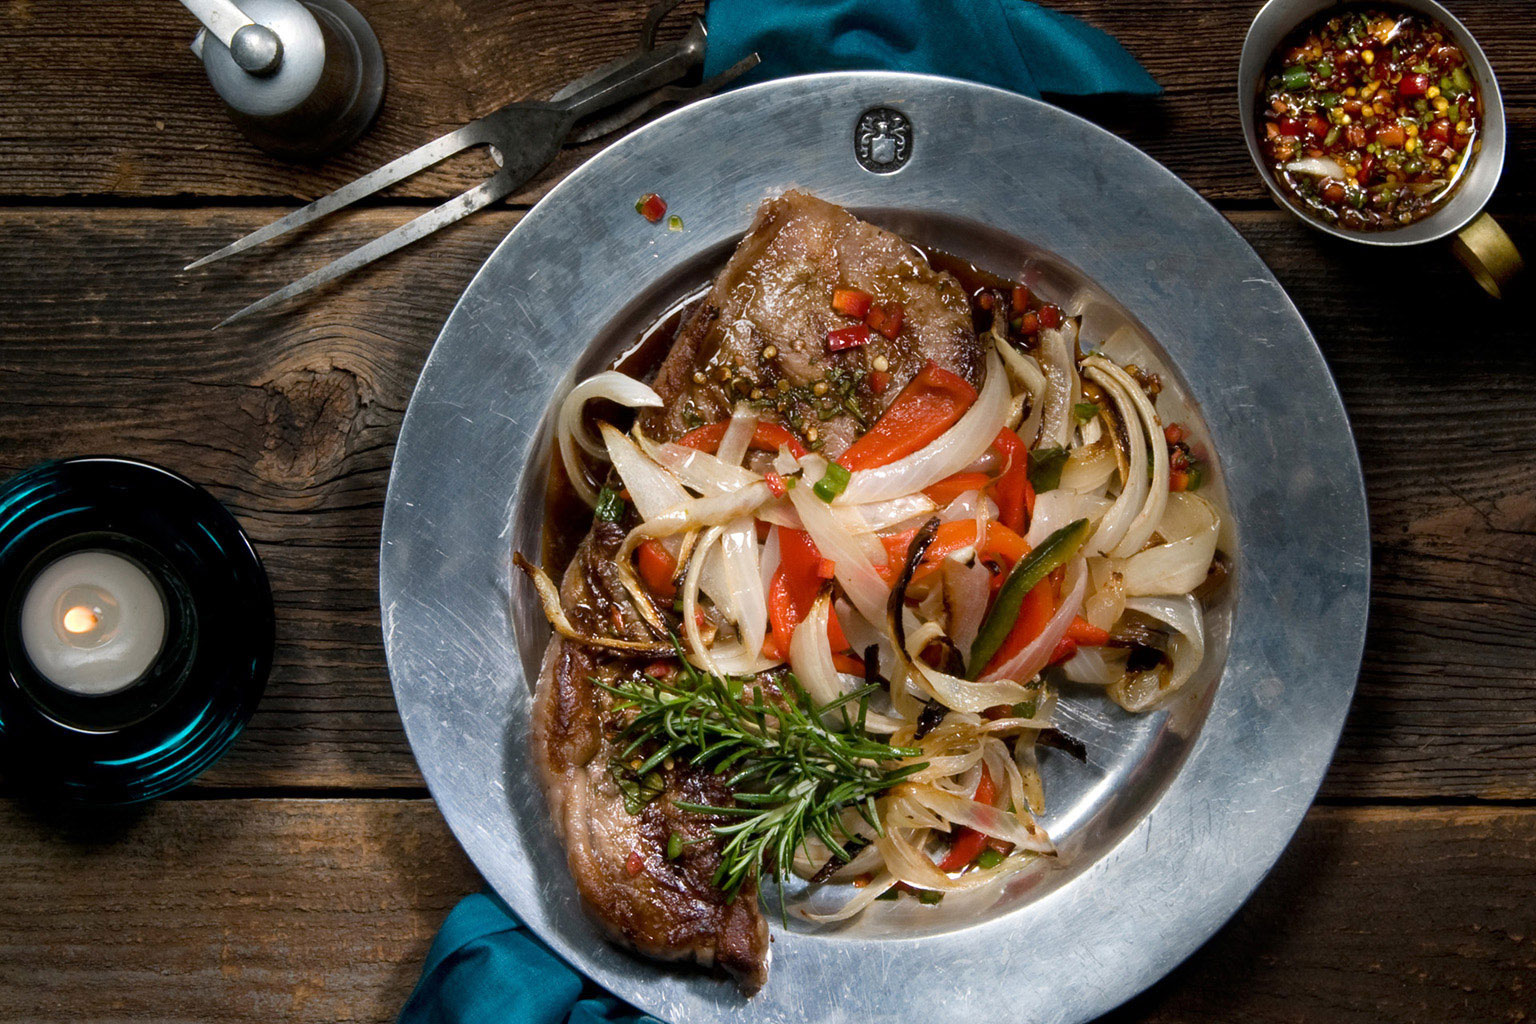 Beautiful-food-photography-of-grilled-rib-eye-steak-with-rosemary-carmelized-onions-and-red-peppers